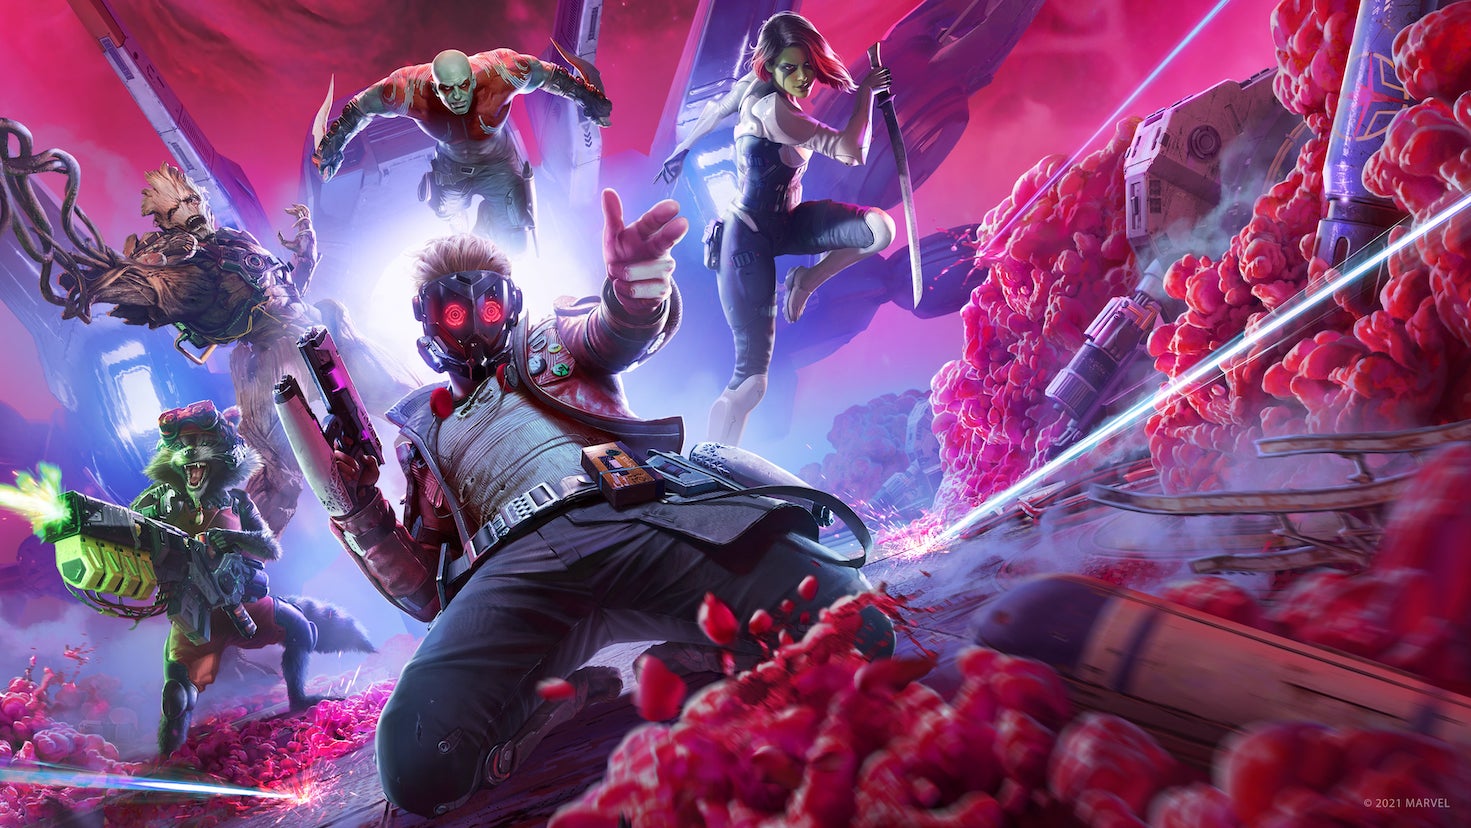 Star Lord, Gamora, Groot, Drax and Rocket Racoon pose for battle in artwork for Marvel's Guardians Of The Galaxy